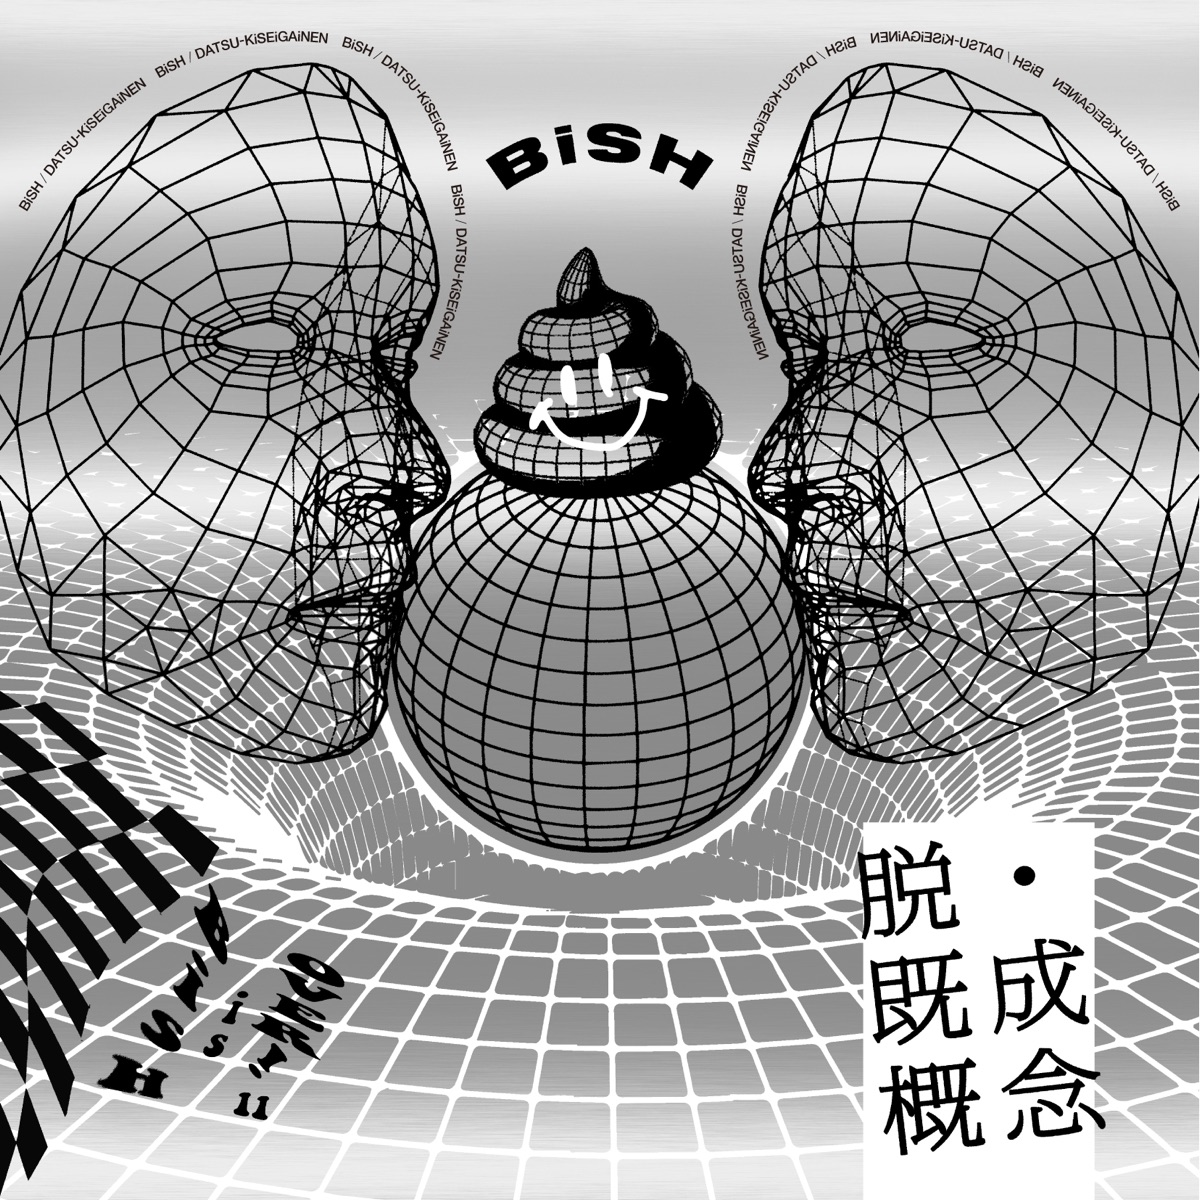 Cover art for『BiSH - 脱・既成概念』from the release『DATSU-KiSEiGAiNEN